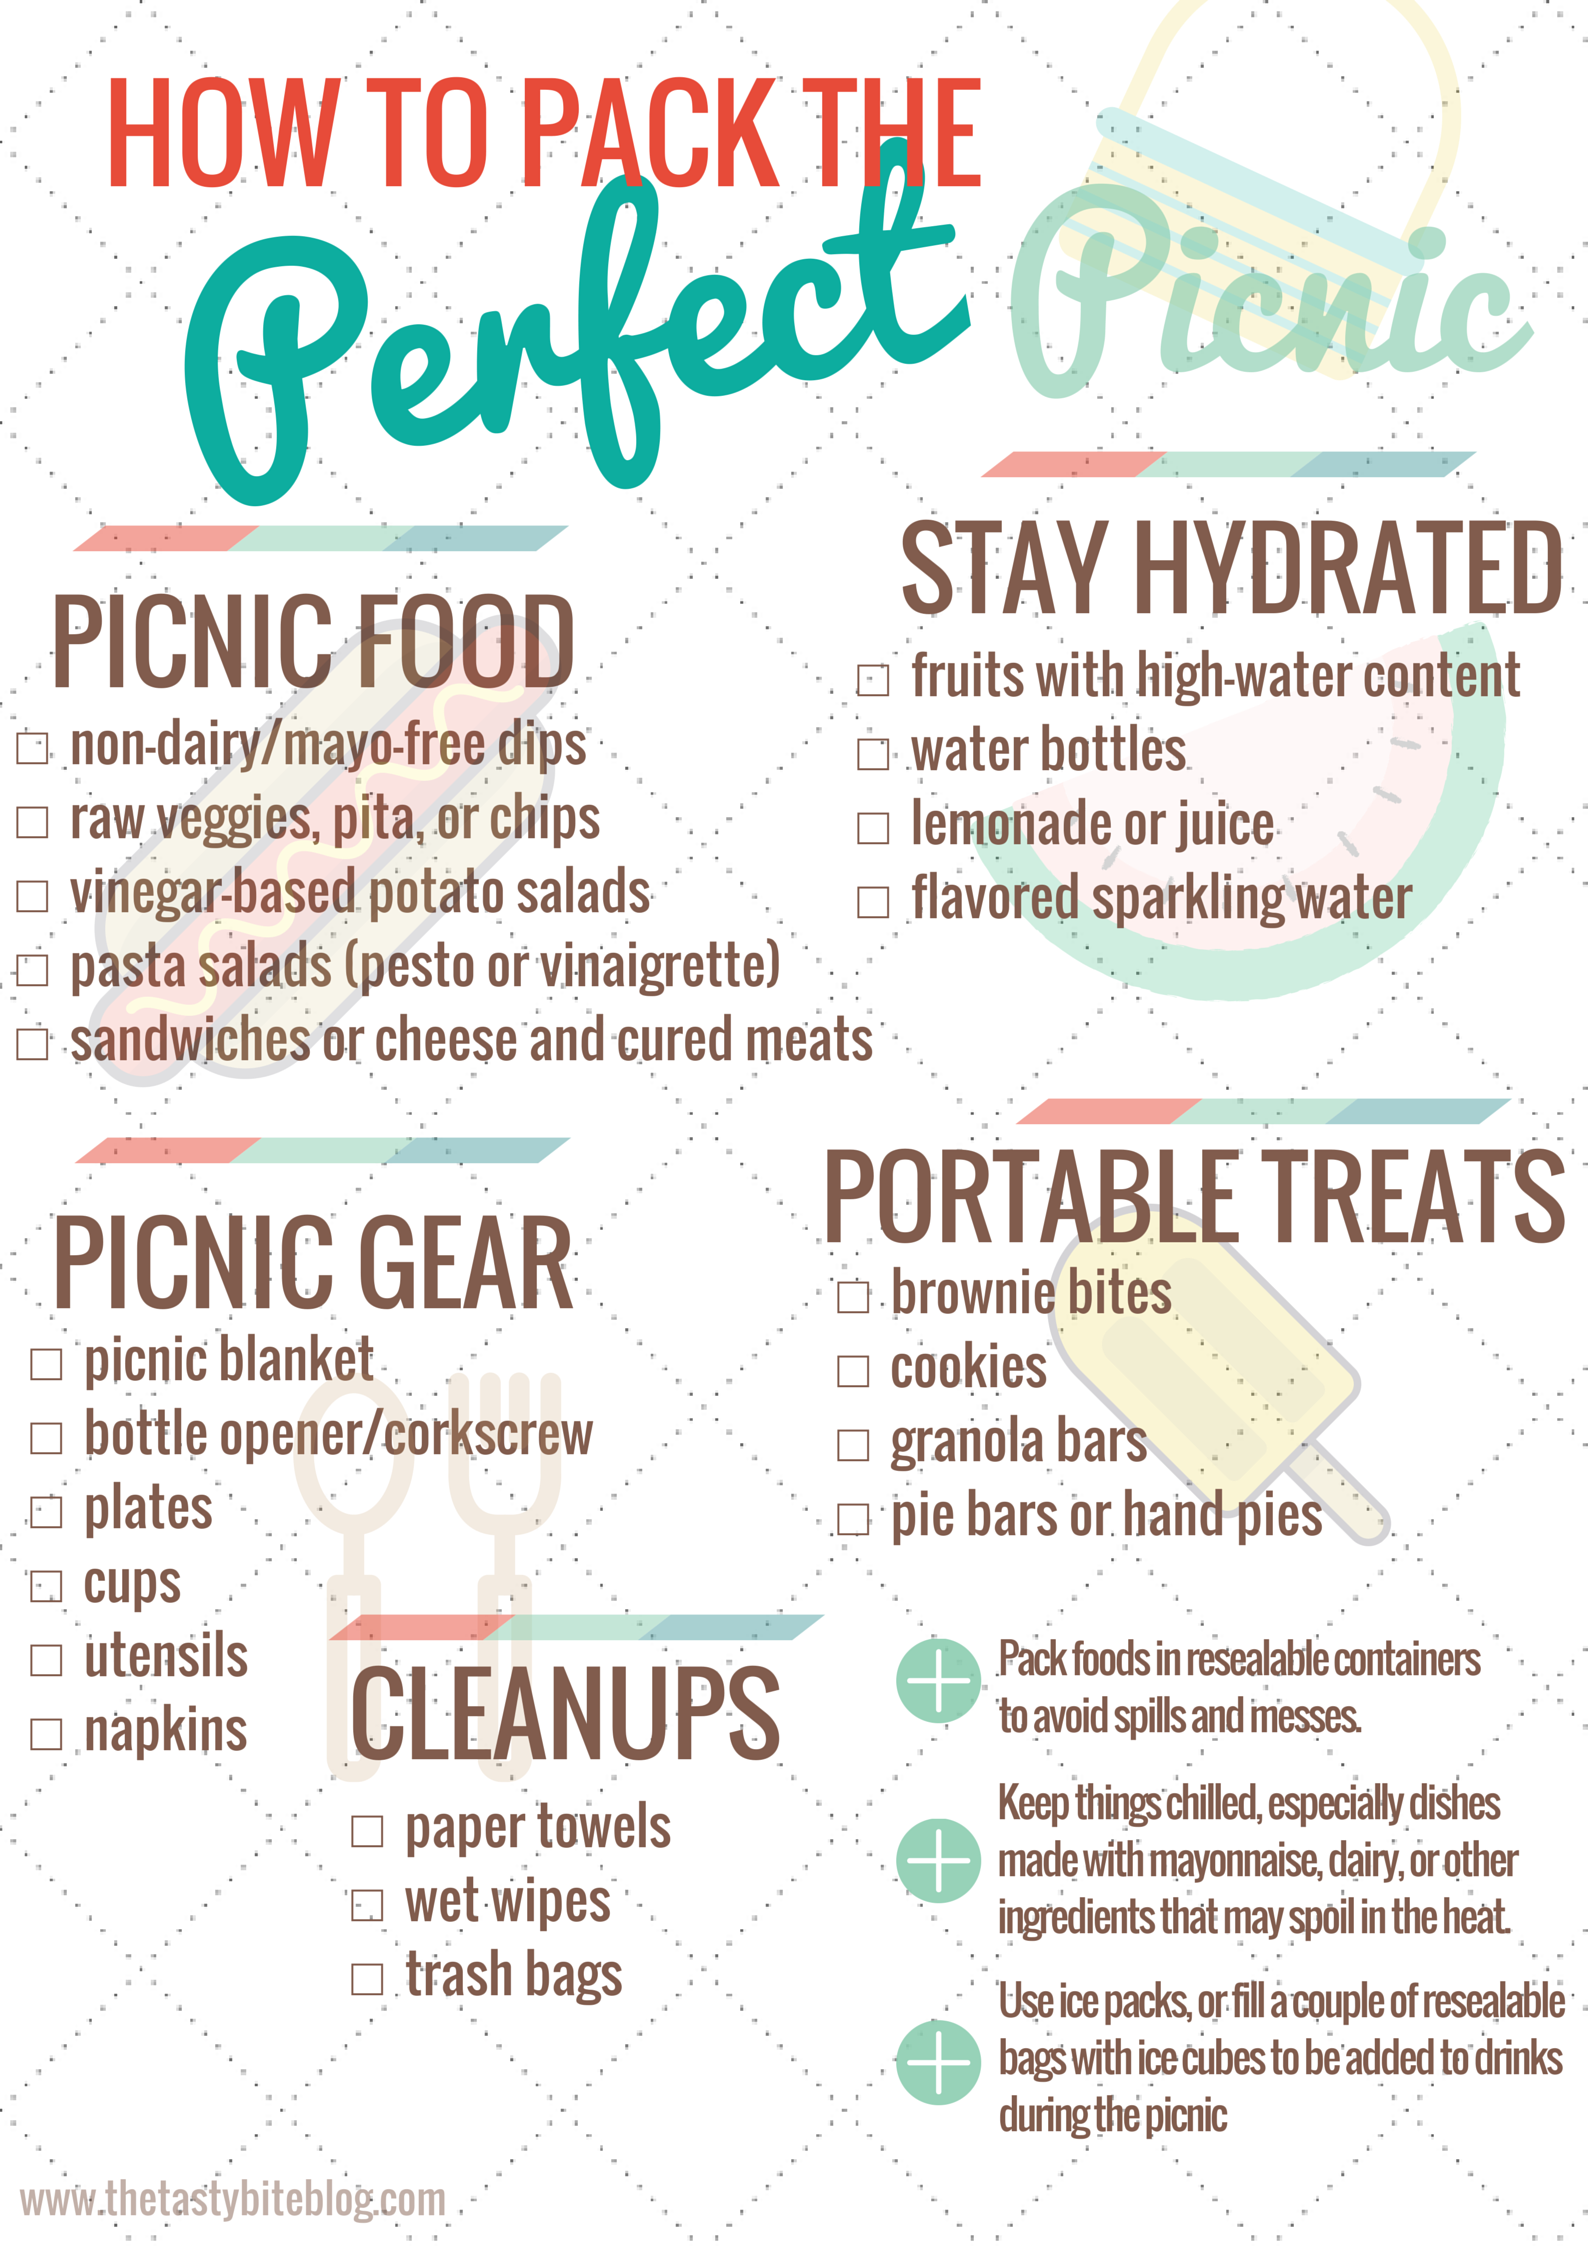 How To Pack the Perfect Picnic - The Tasty Bite